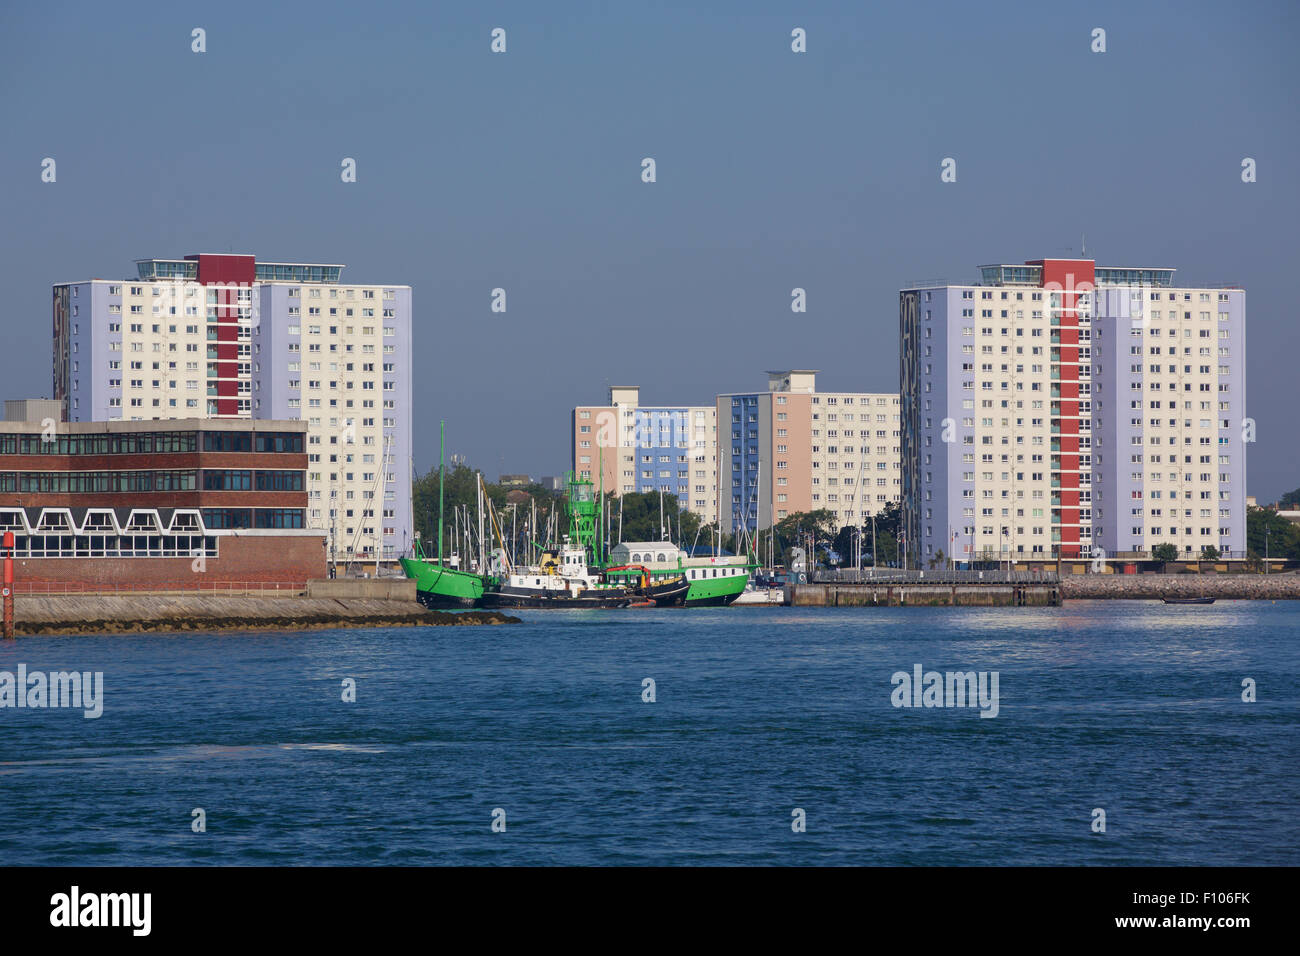 View of the tower blocks on the harbour side in Gosport. View from spice island showing the trinity lightship in center. Stock Photo